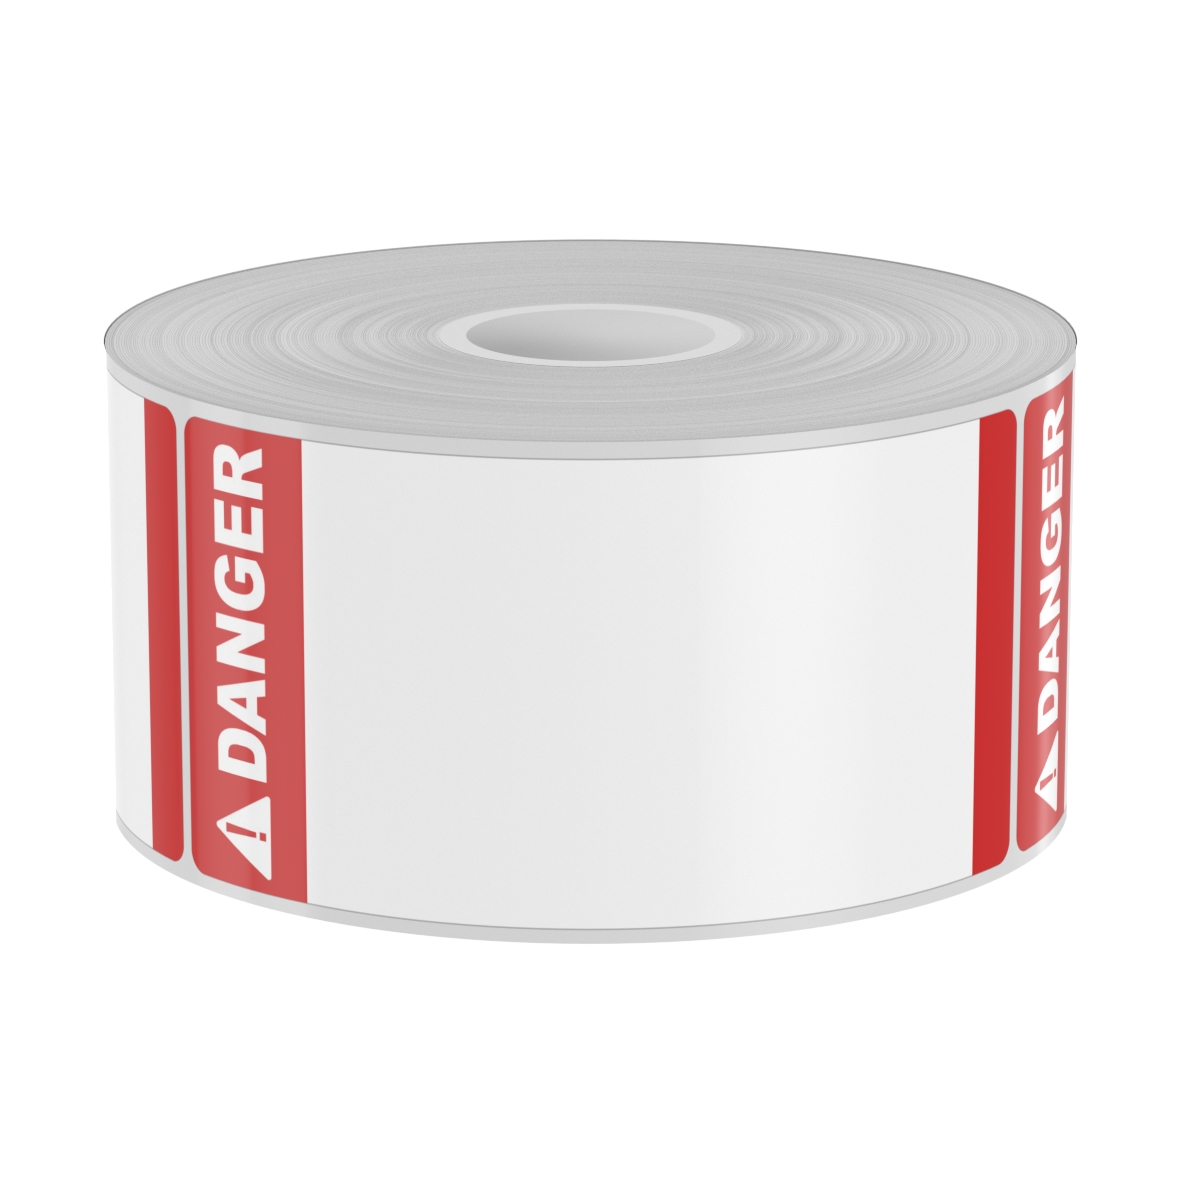 Ask a question about 250 2" x 4" High-Performance Die-Cut Red Double Band White Danger " Portrait